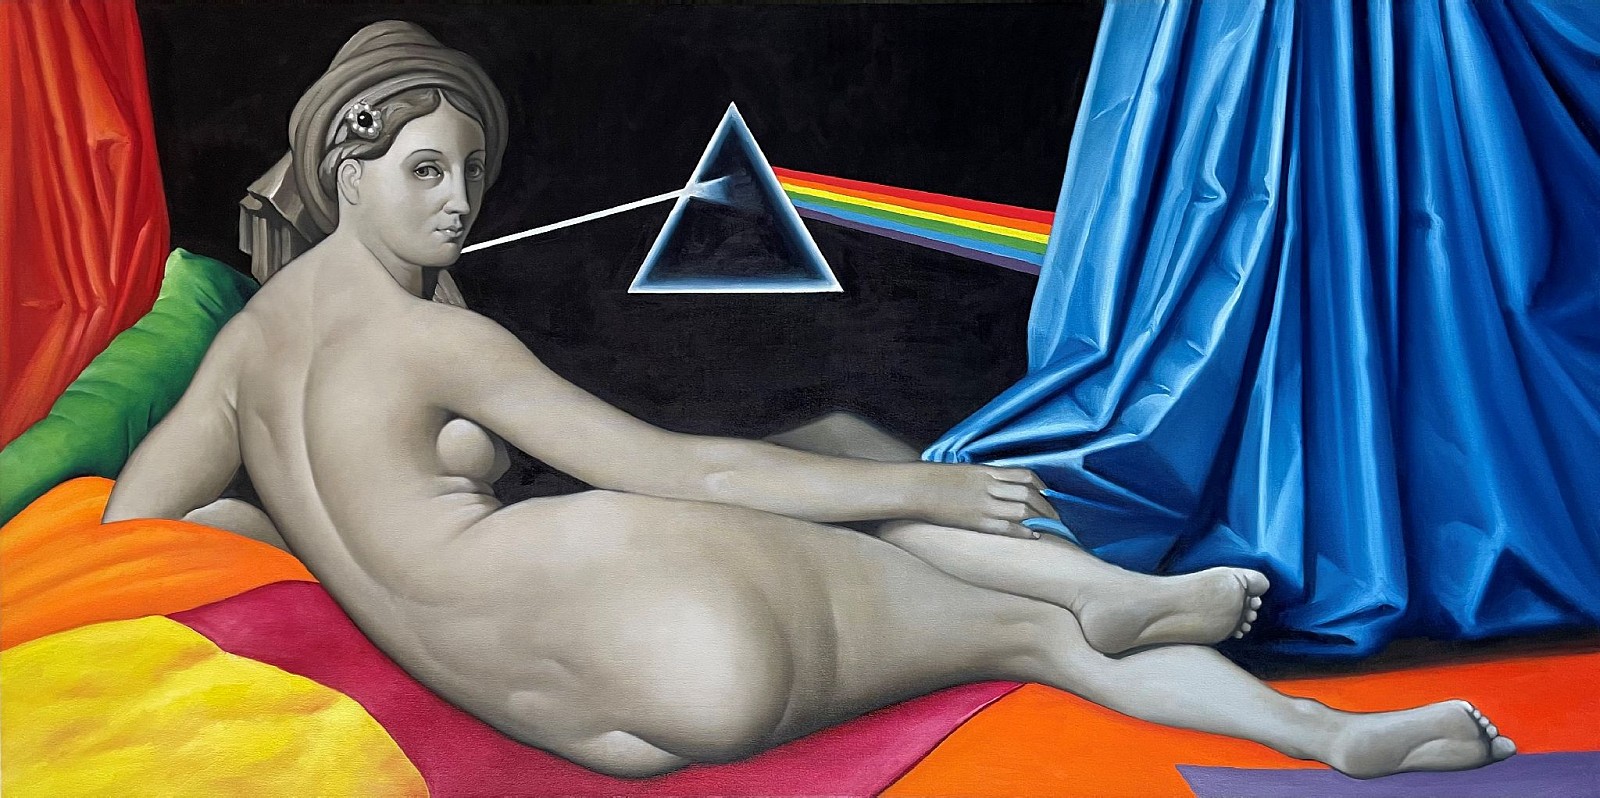 William Nelson, Odalisque on the Dark Side of the Moon, 2023
oil on canvas, 30 x 60 in.